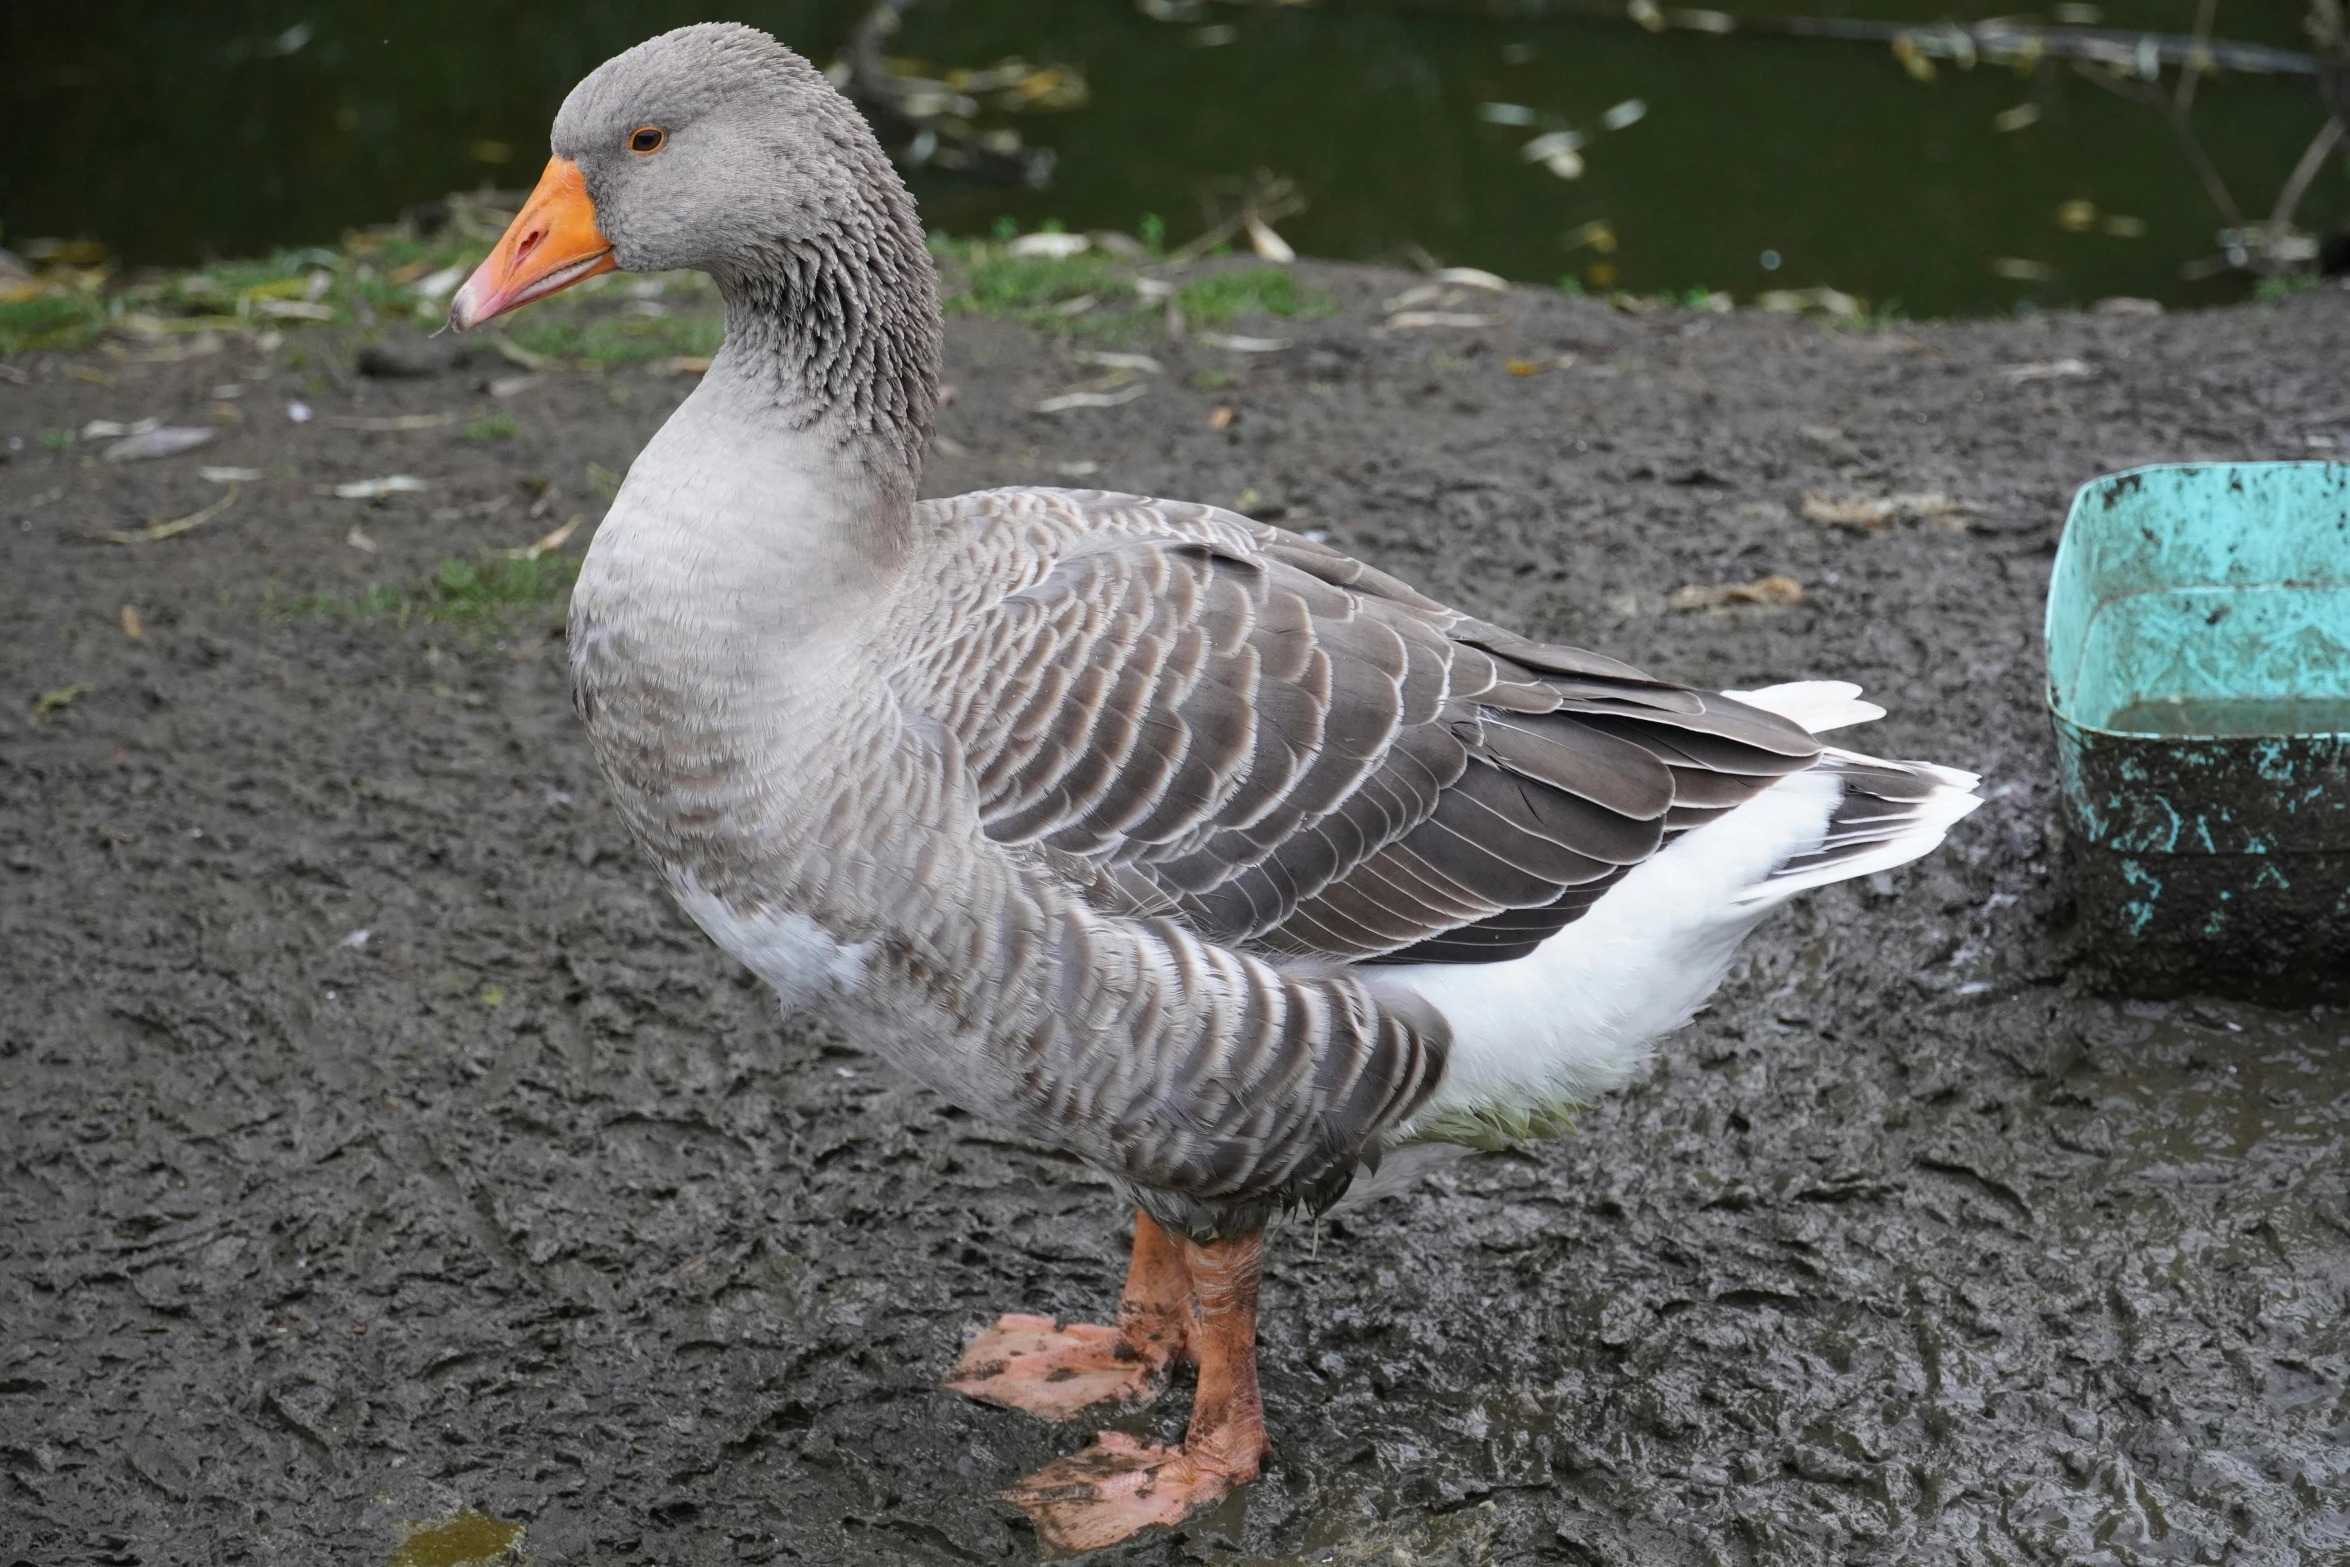 a duck standing on the ground by some mud